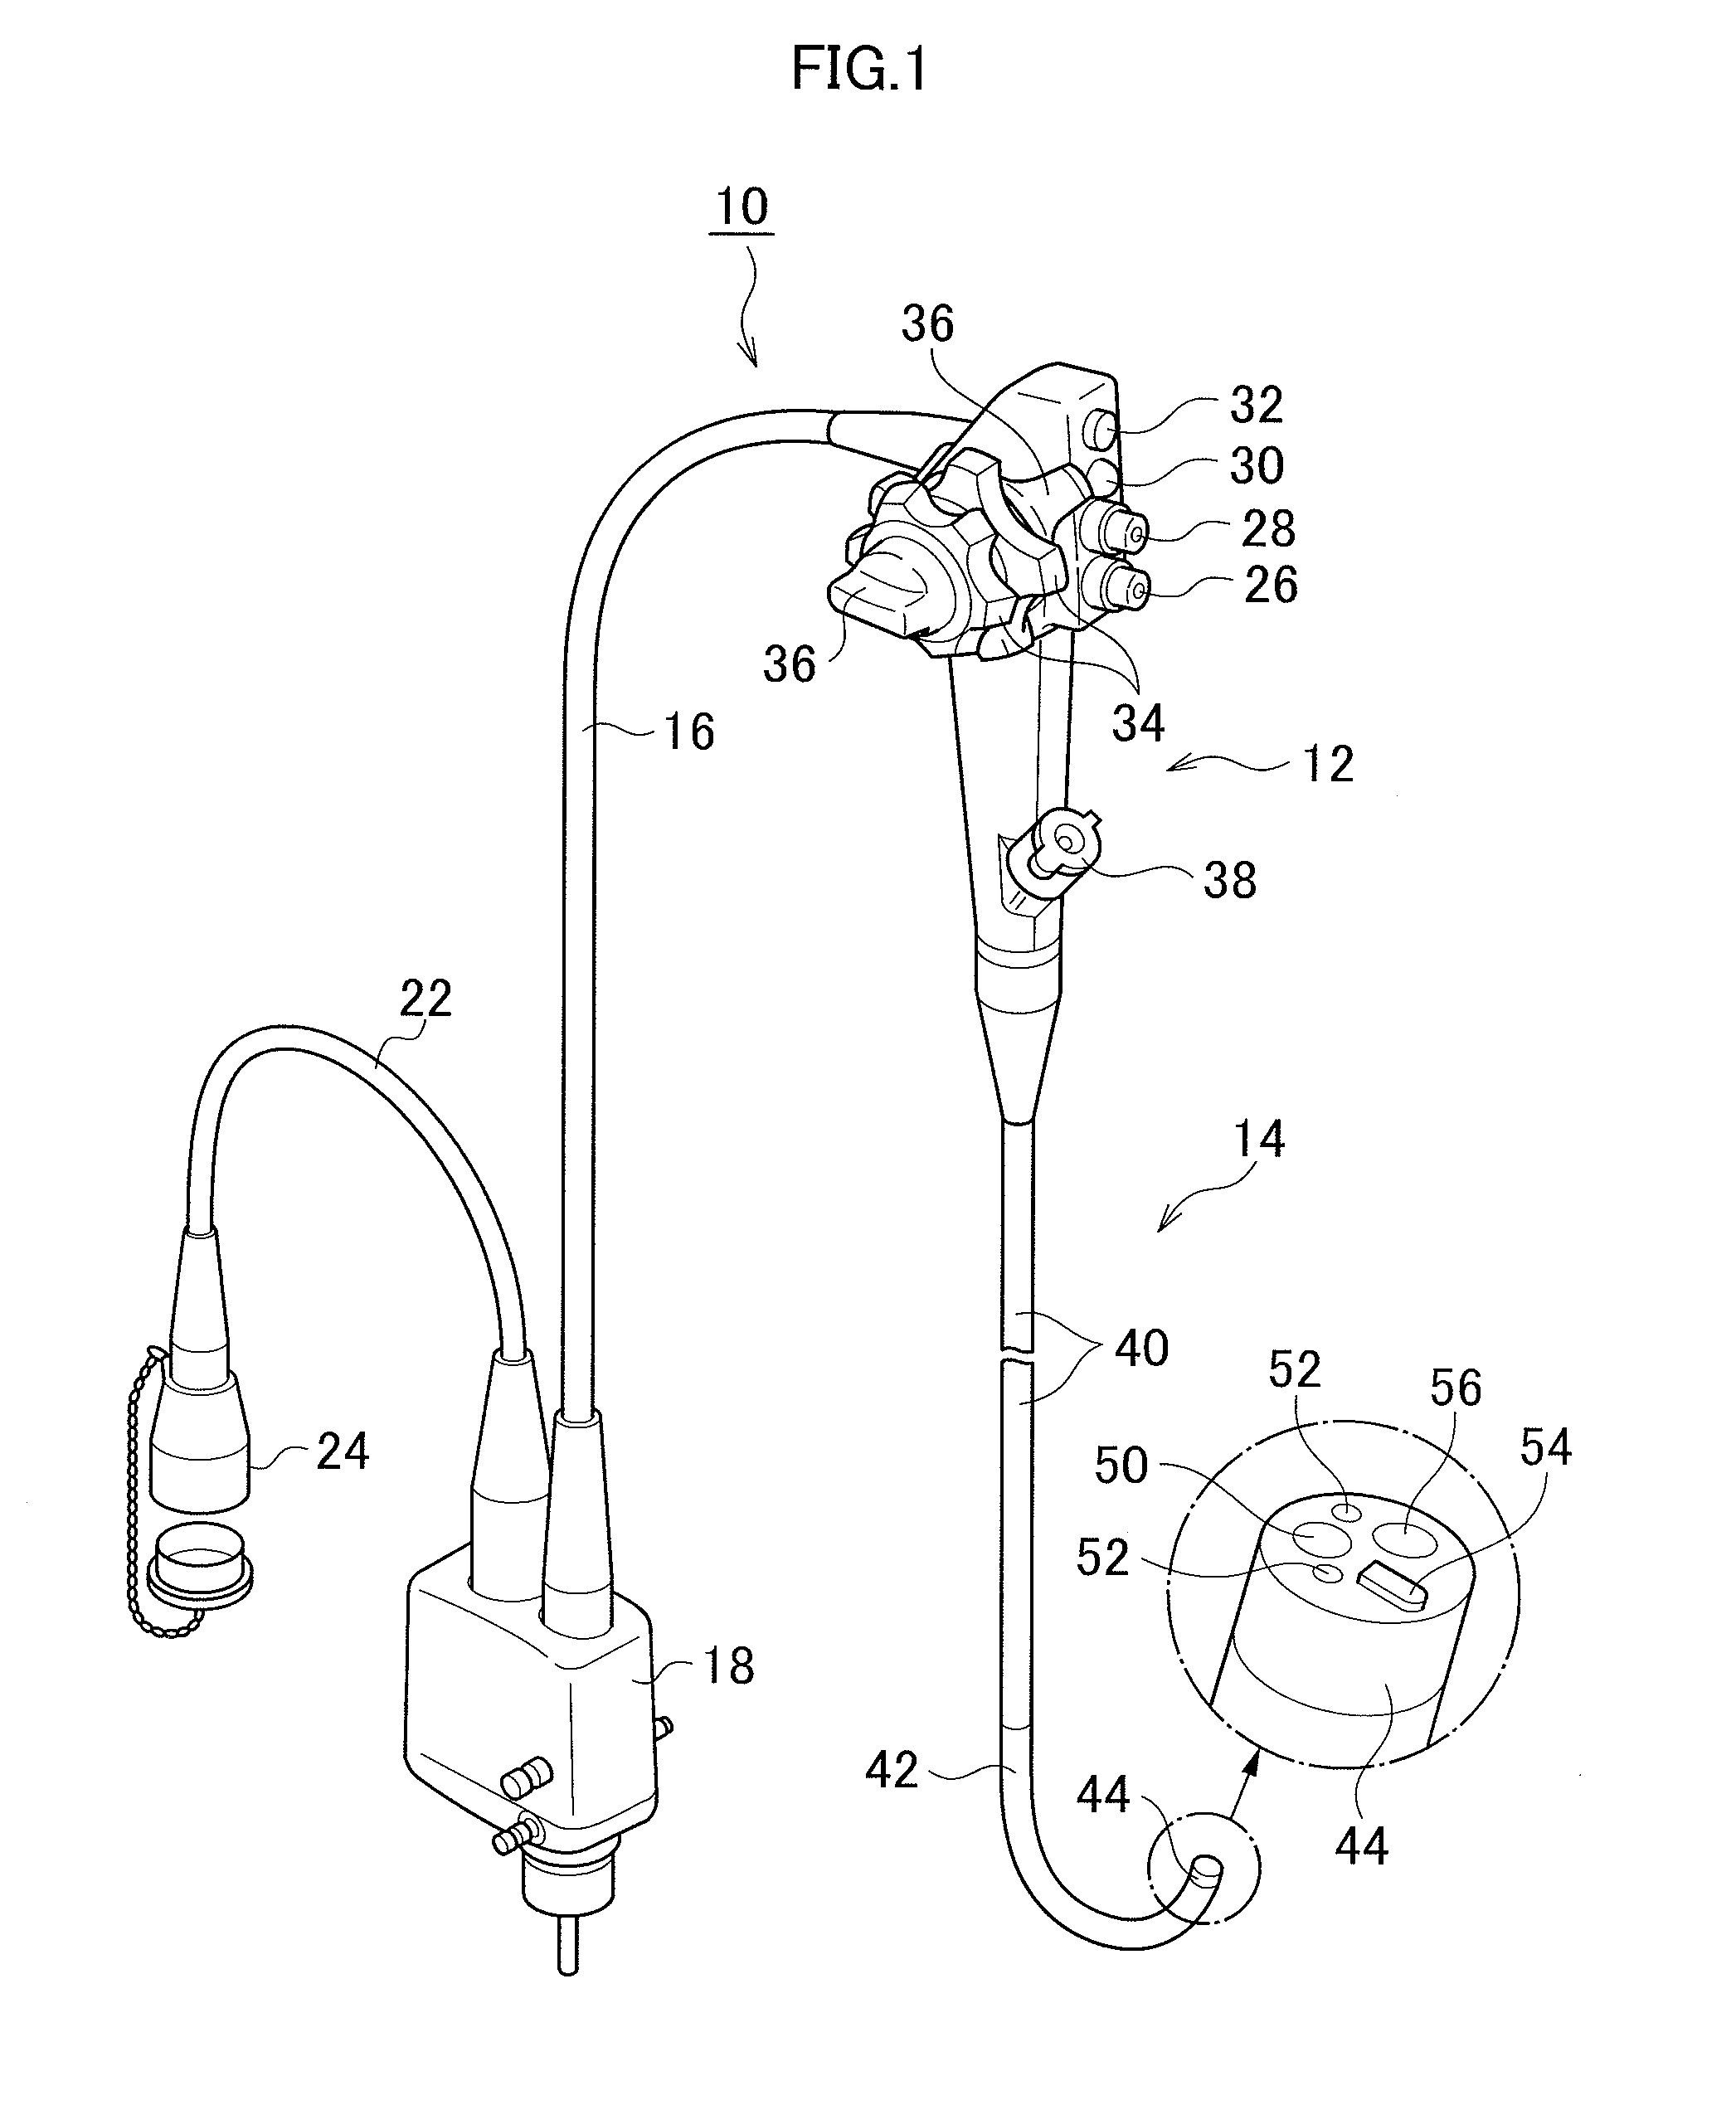 Image pickup device and endoscope